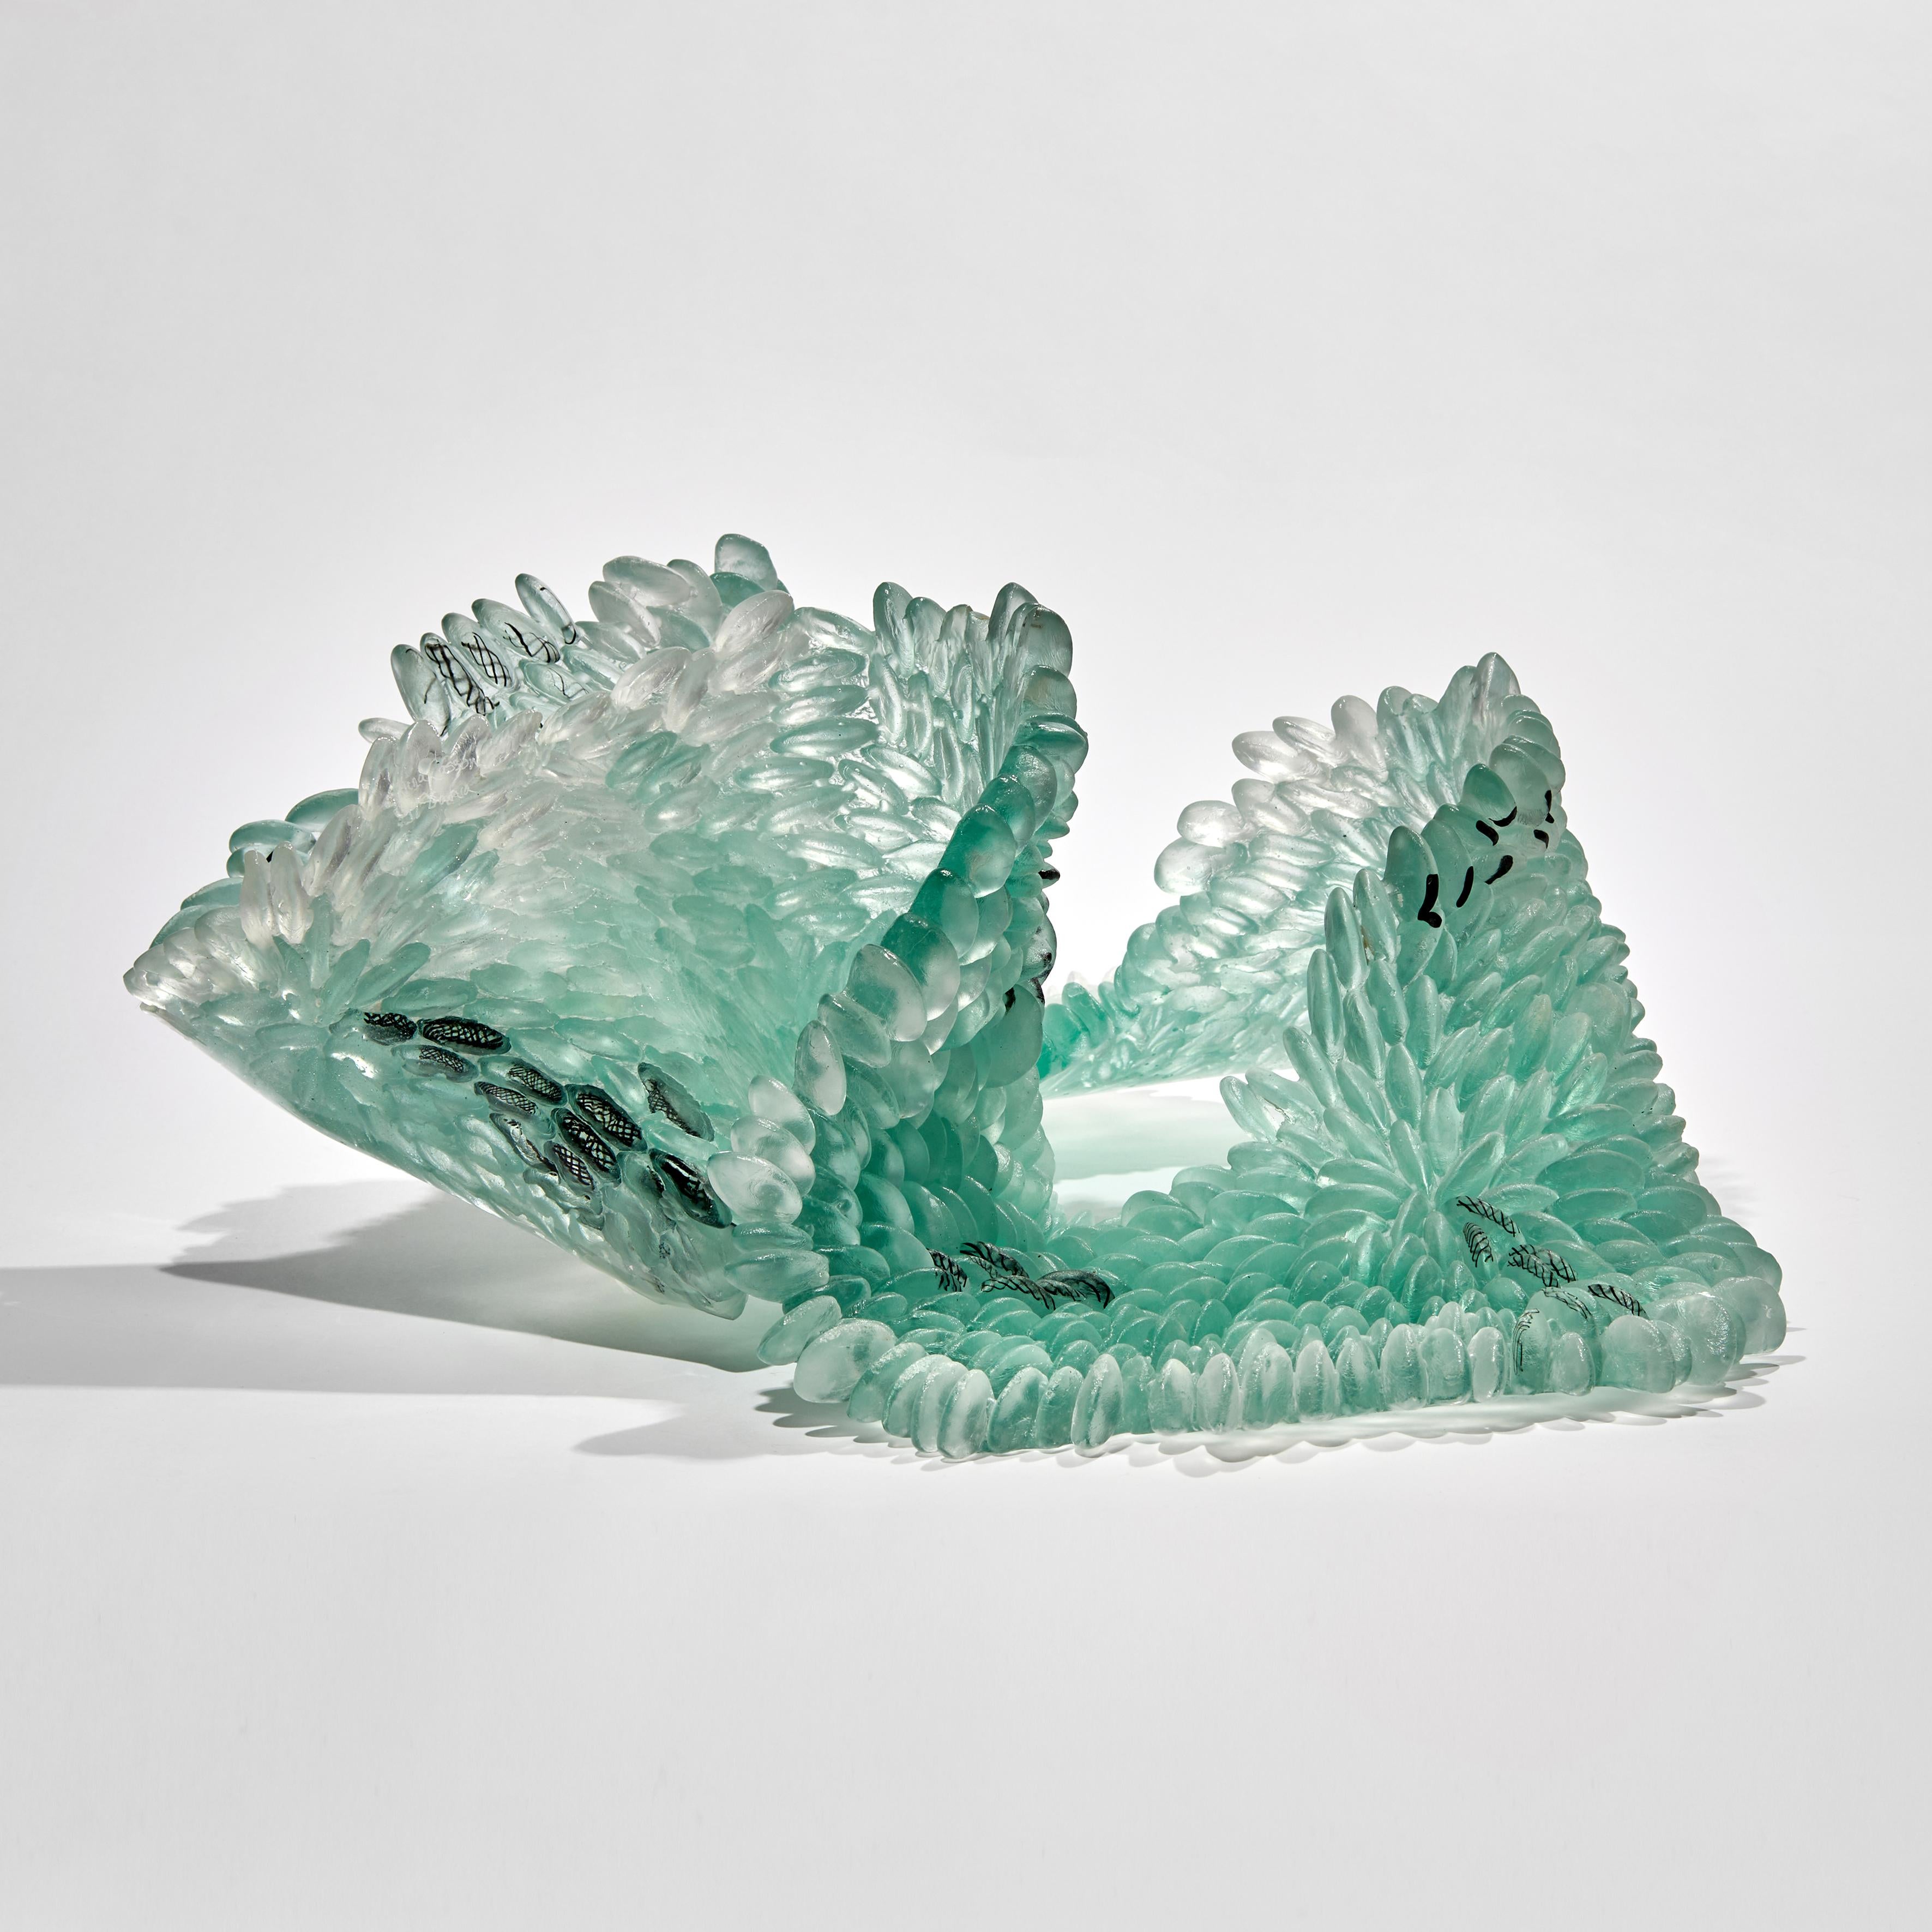 Hand-Crafted Pale Lichen, Unique Glass Sculpture in Jade and Grey by Nina Casson McGarva